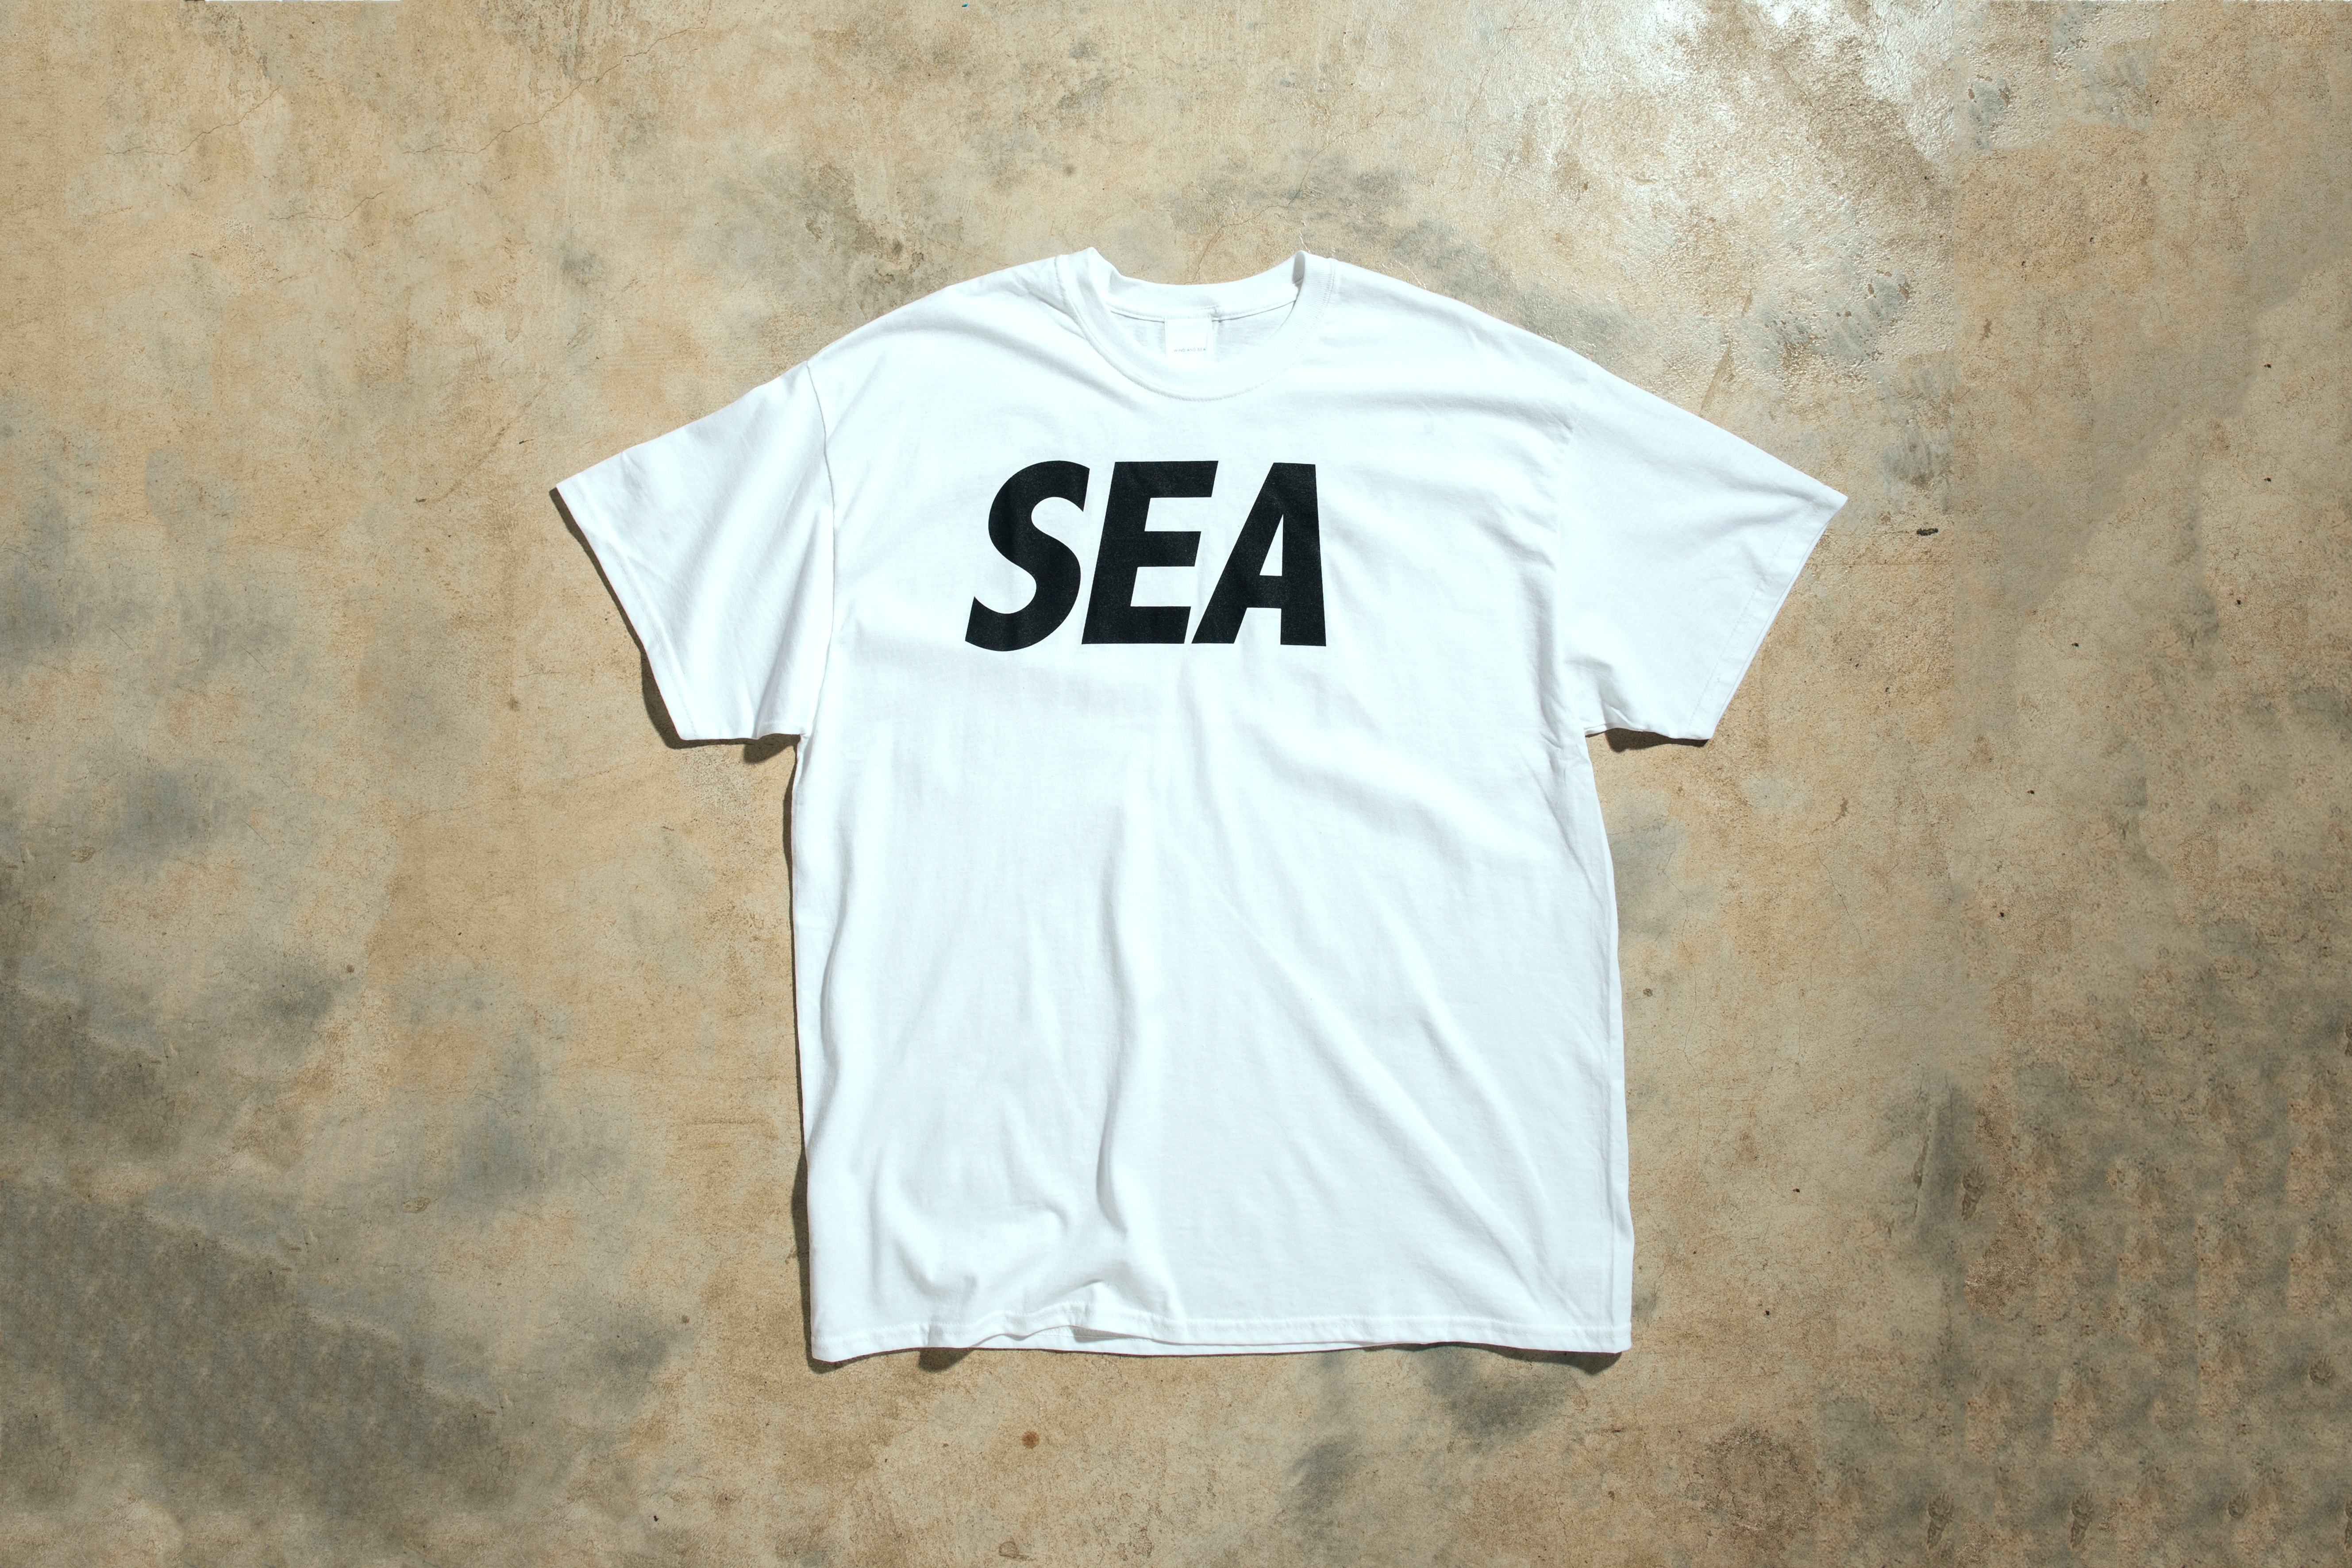 WIND AND SEA x G.R.S Kownloon 期間限定店詳情公開